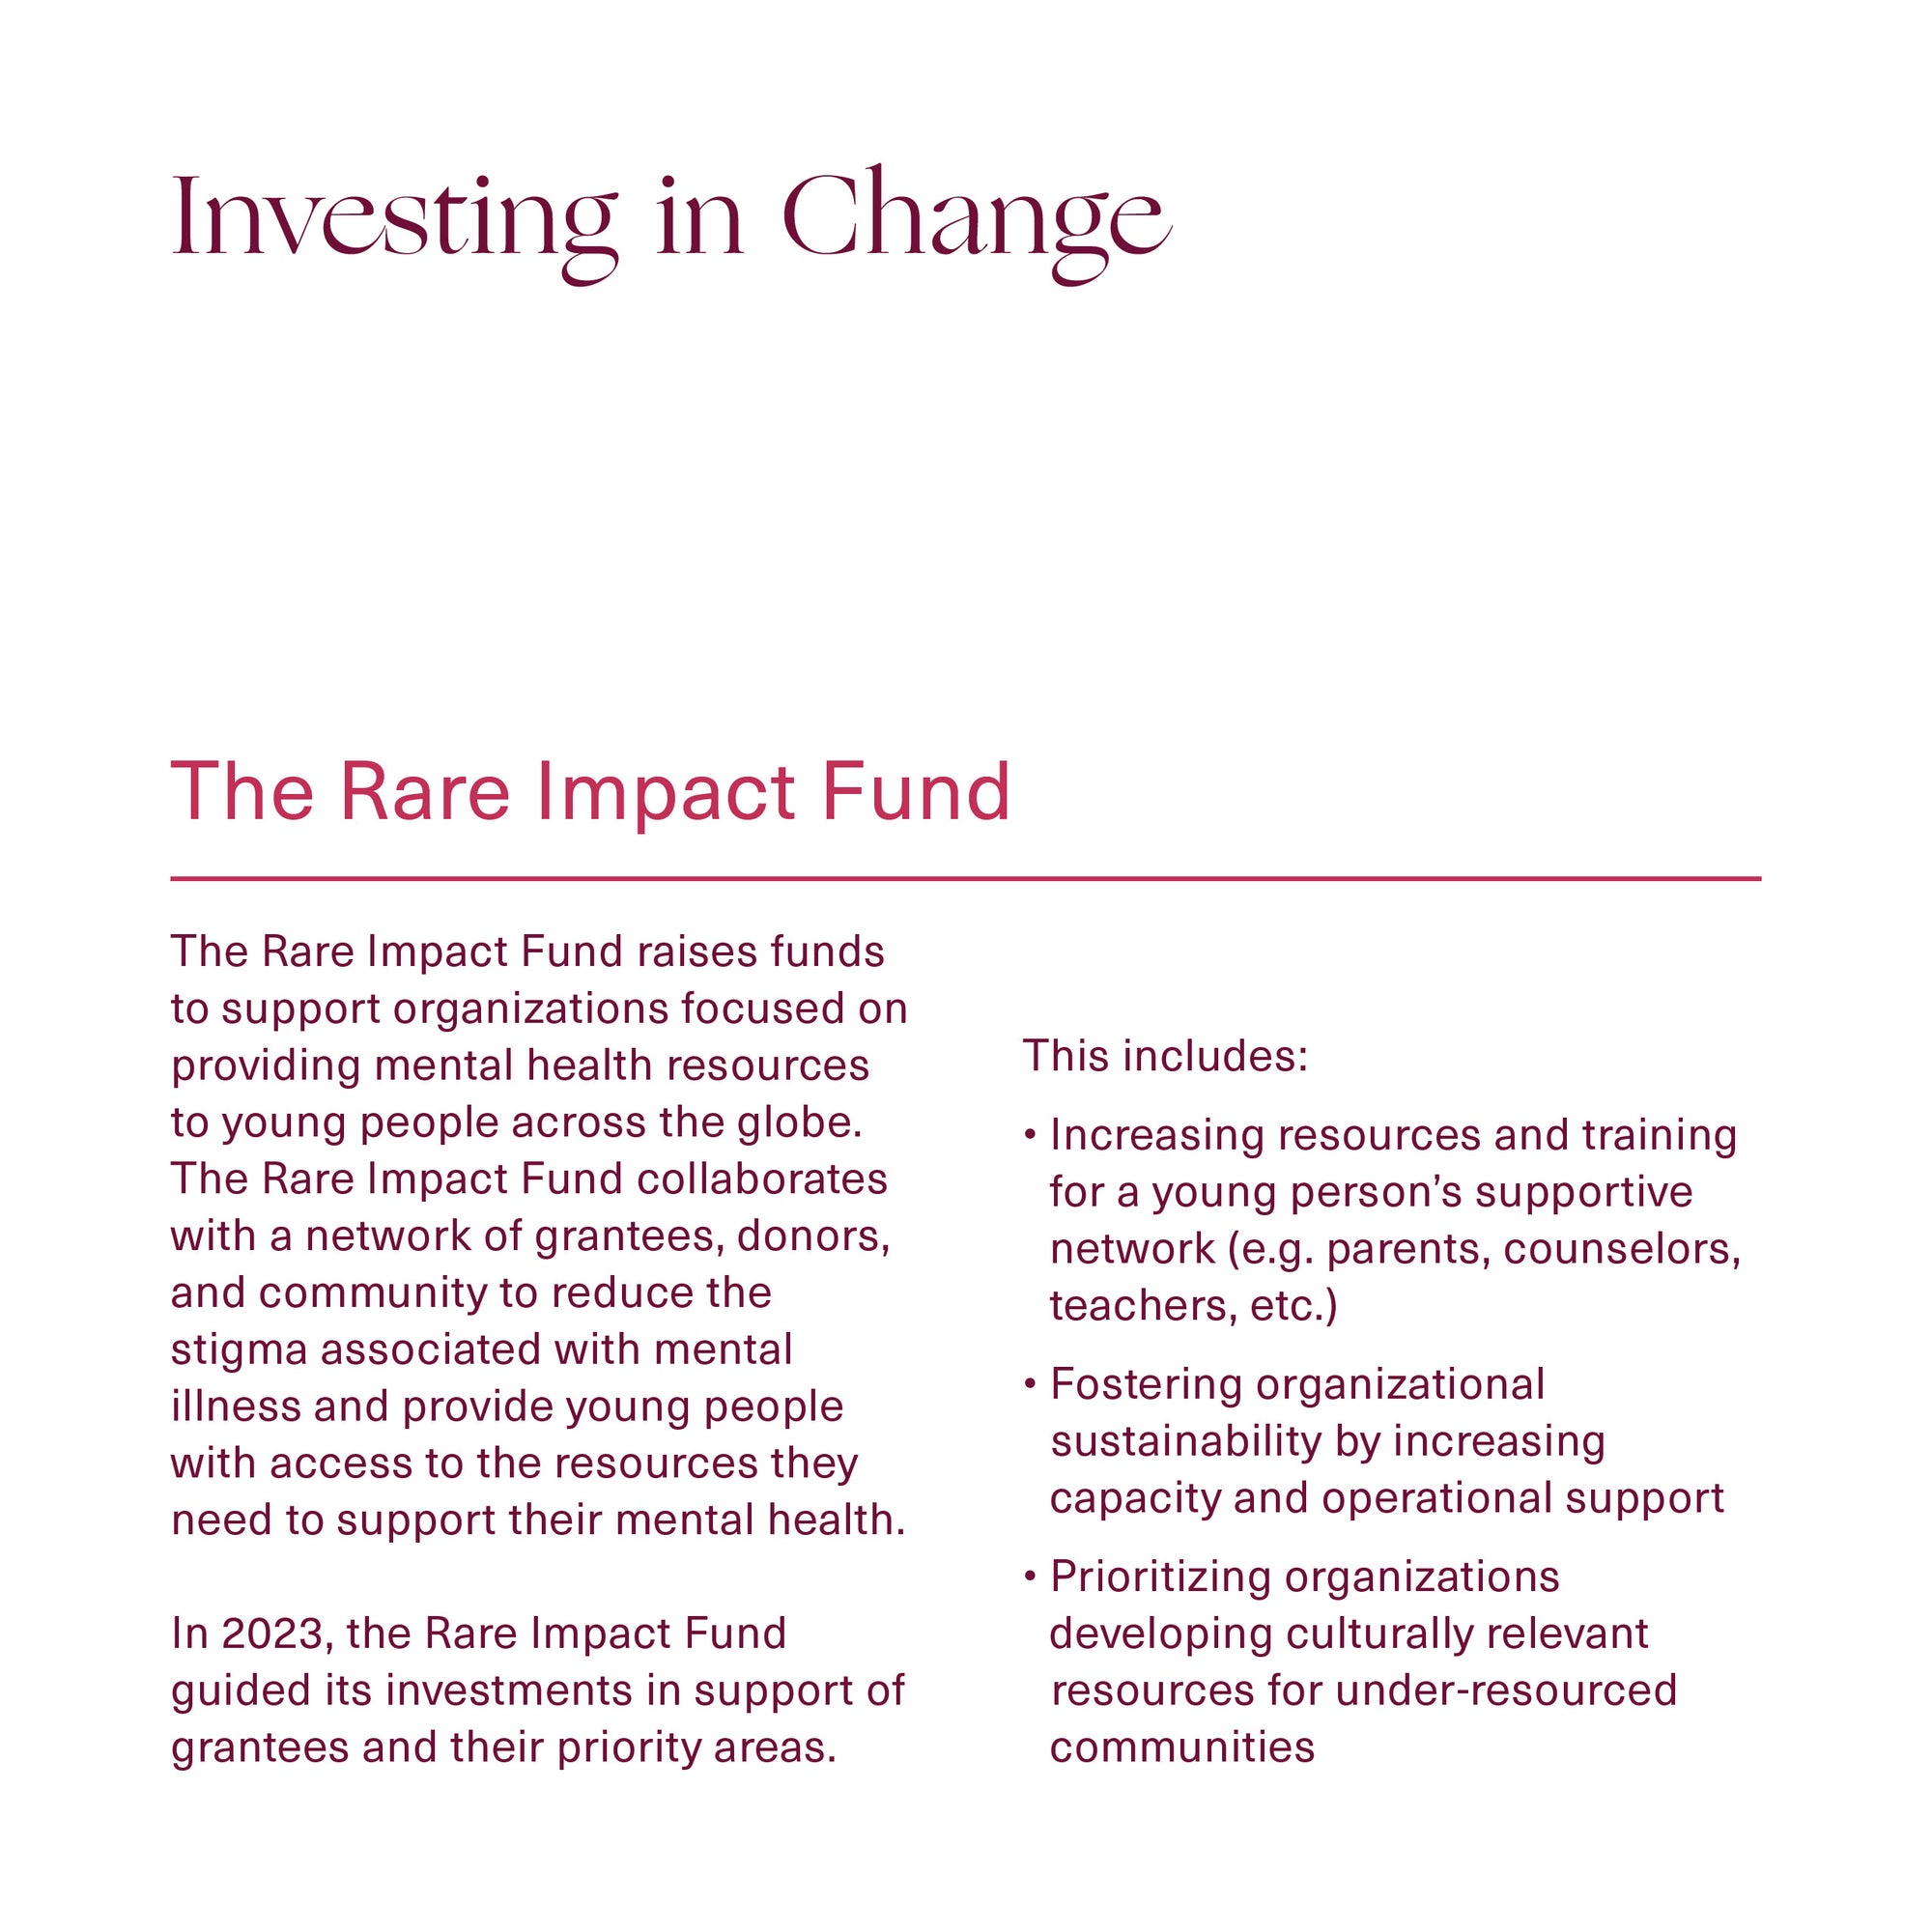 Investing In Change: Image showing The Rare Impact Fund's Investment in change